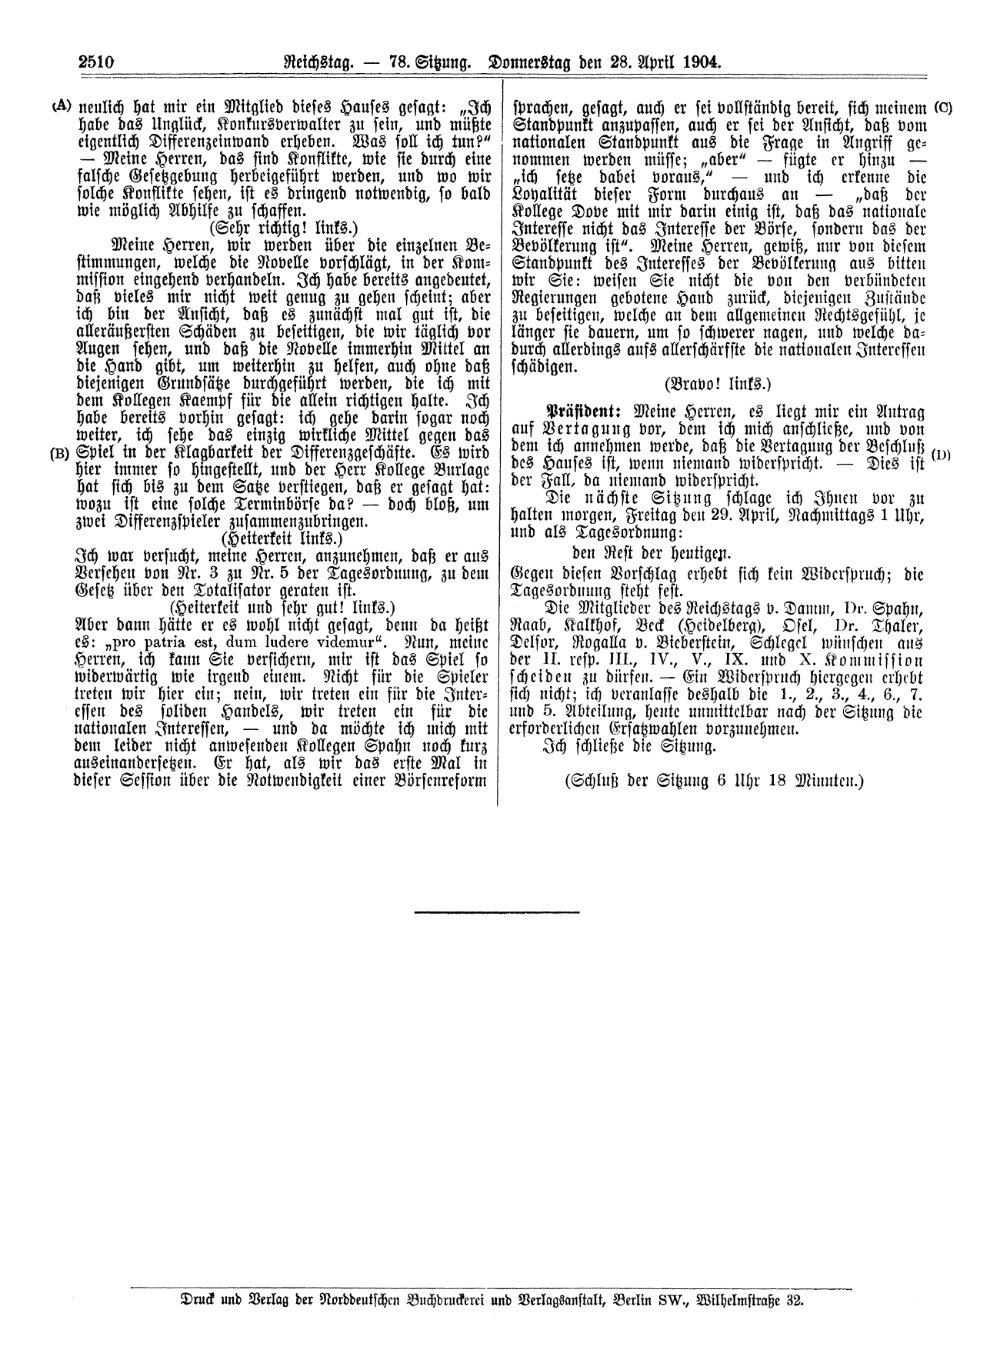 Scan of page 2510